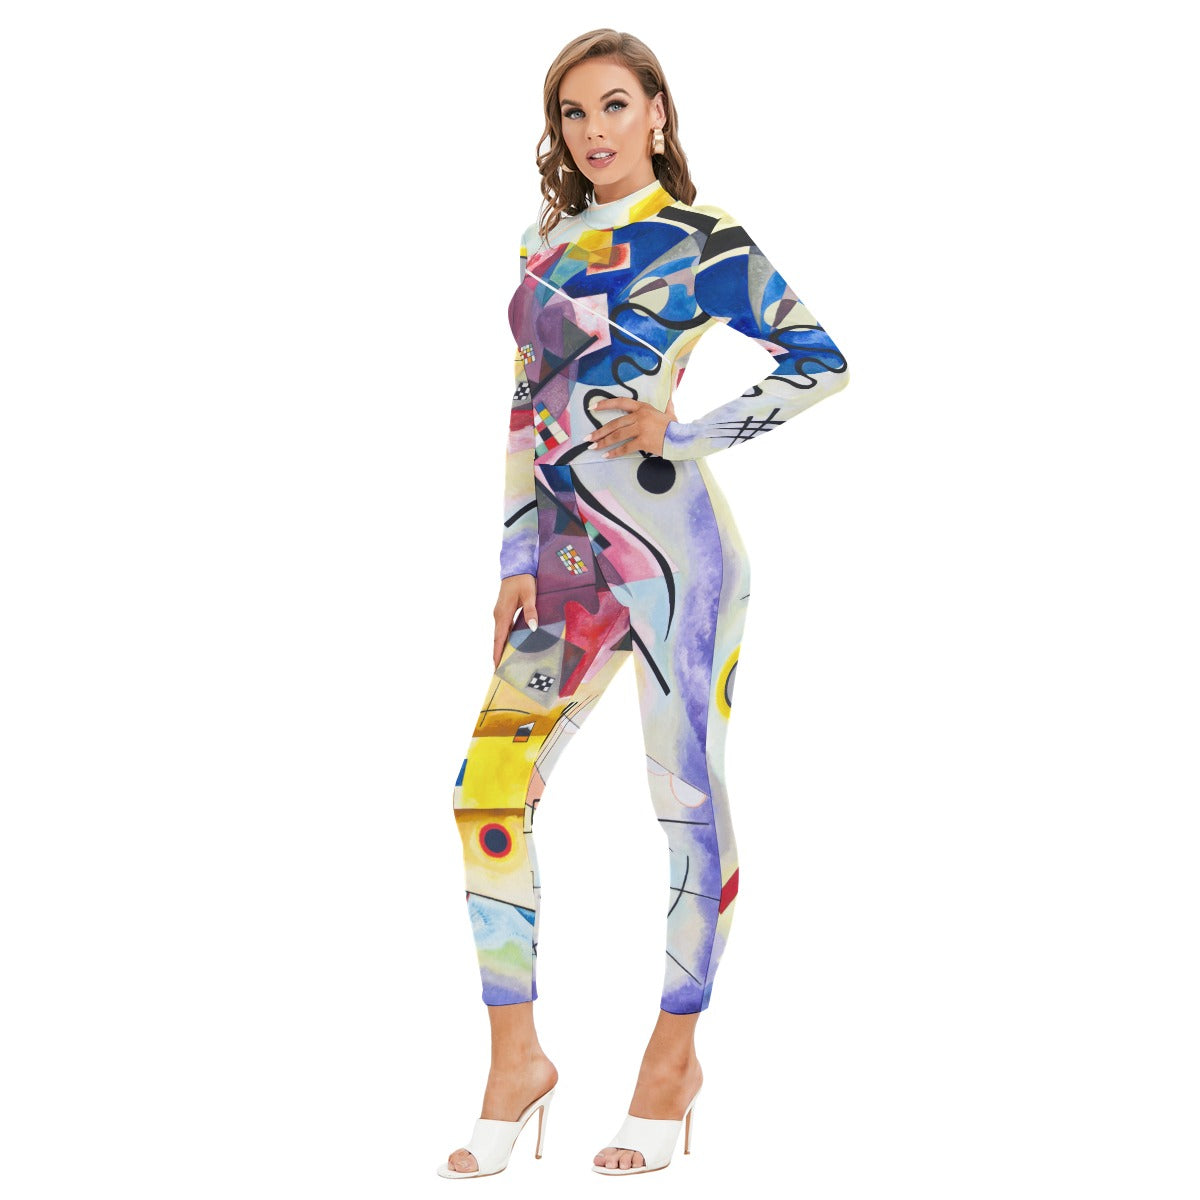 Women's Colorful Artist Inspired Clothing